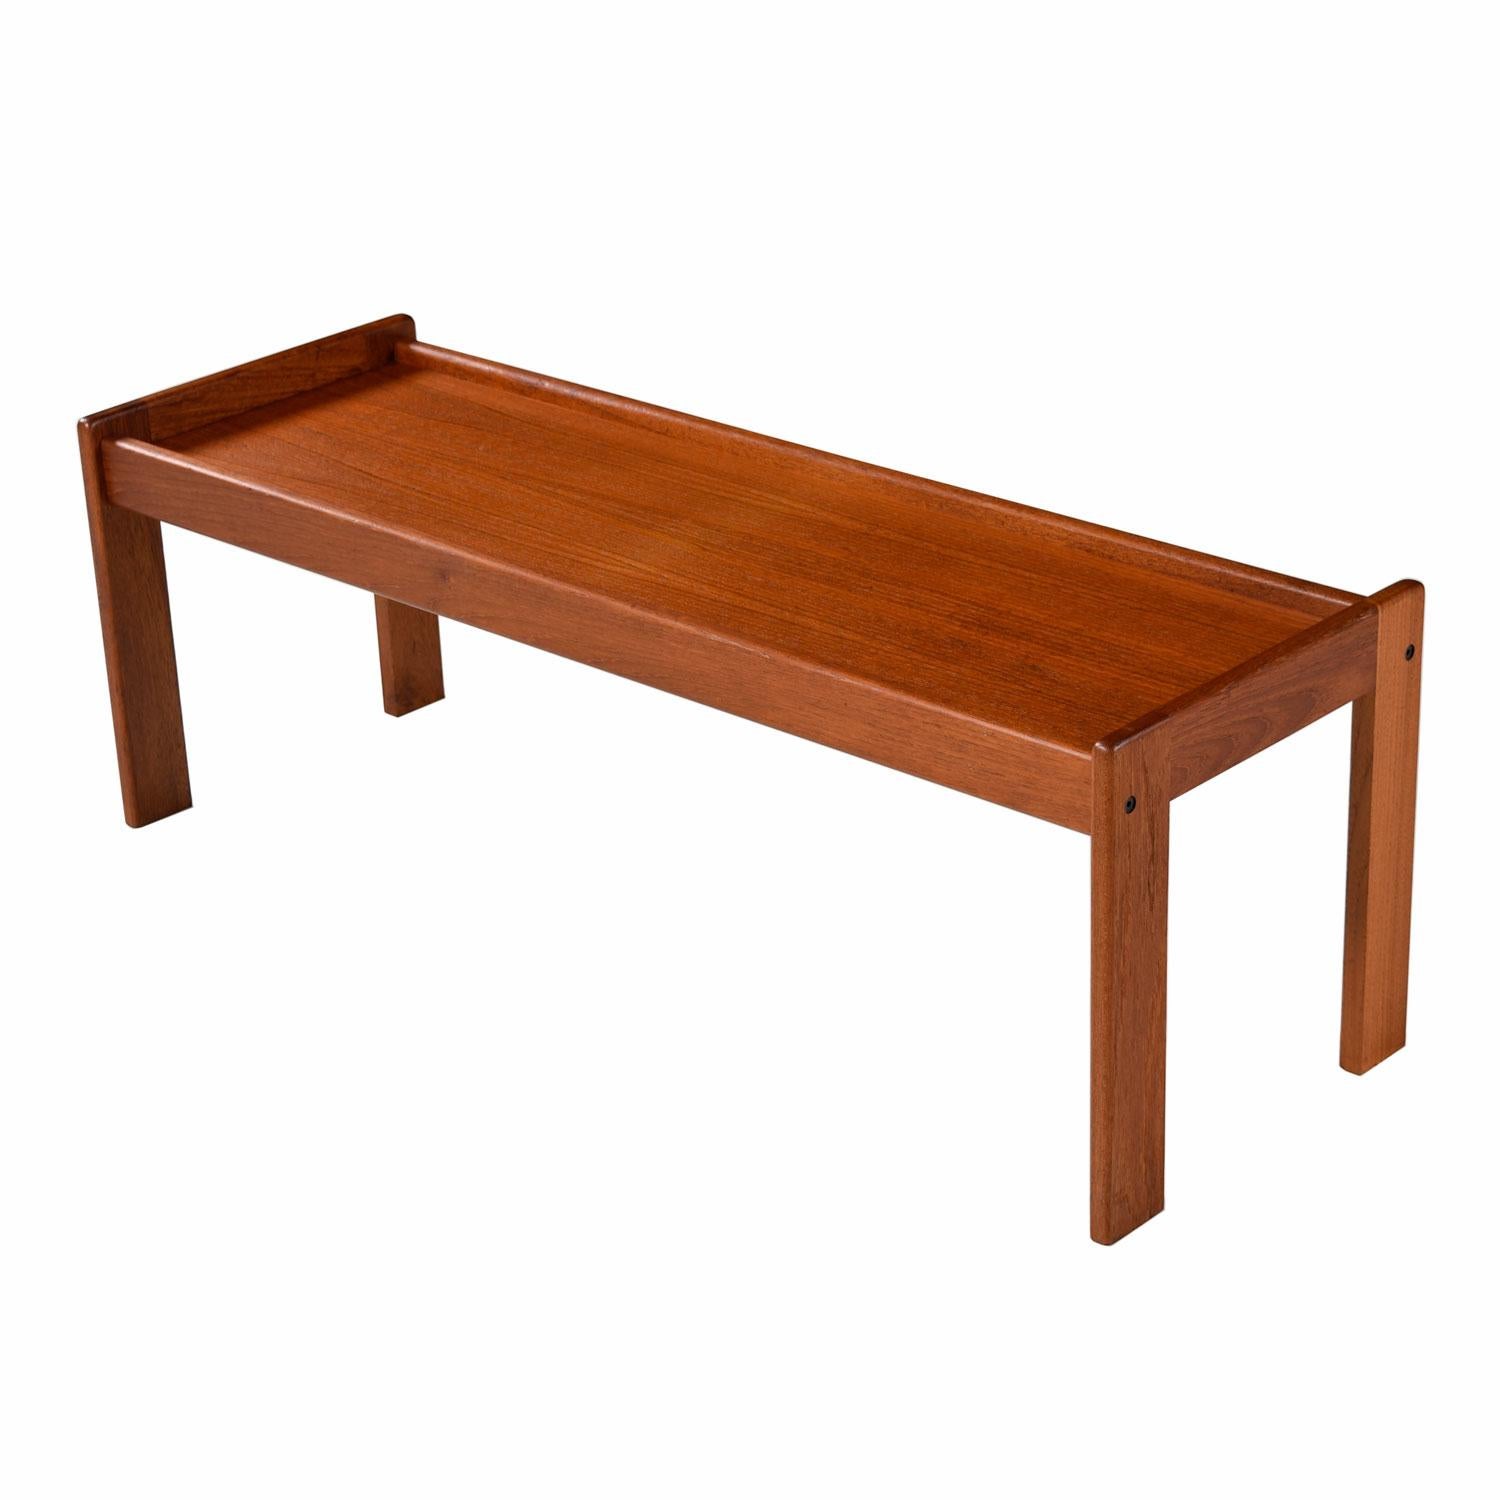 Scandinavian Modern Danish teak bench coffee table by Komfort. 100% solid teak in excellent in vintage condition. Perfectly suited for nearly any room. Removable, upholstered cushion allows this bench to double as a slender coffee table. 

Our